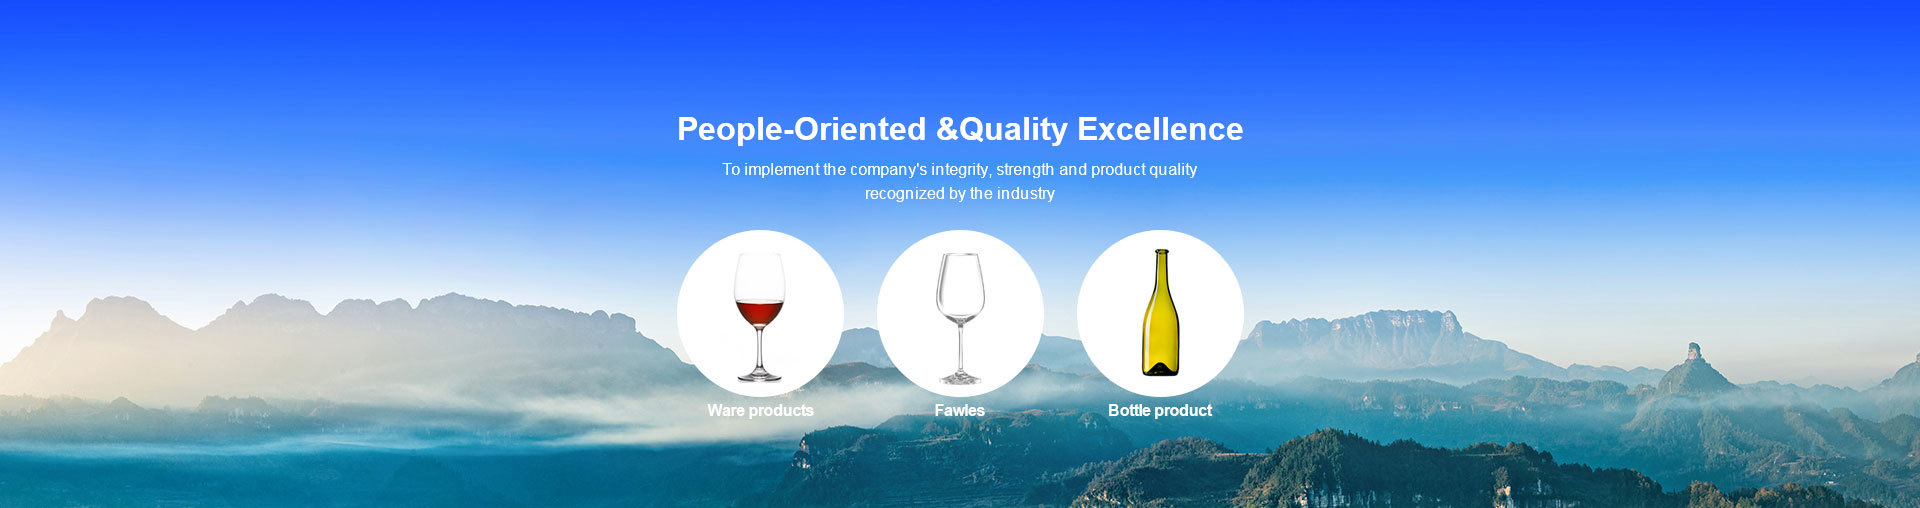 People-Oriented &Quality Excellence